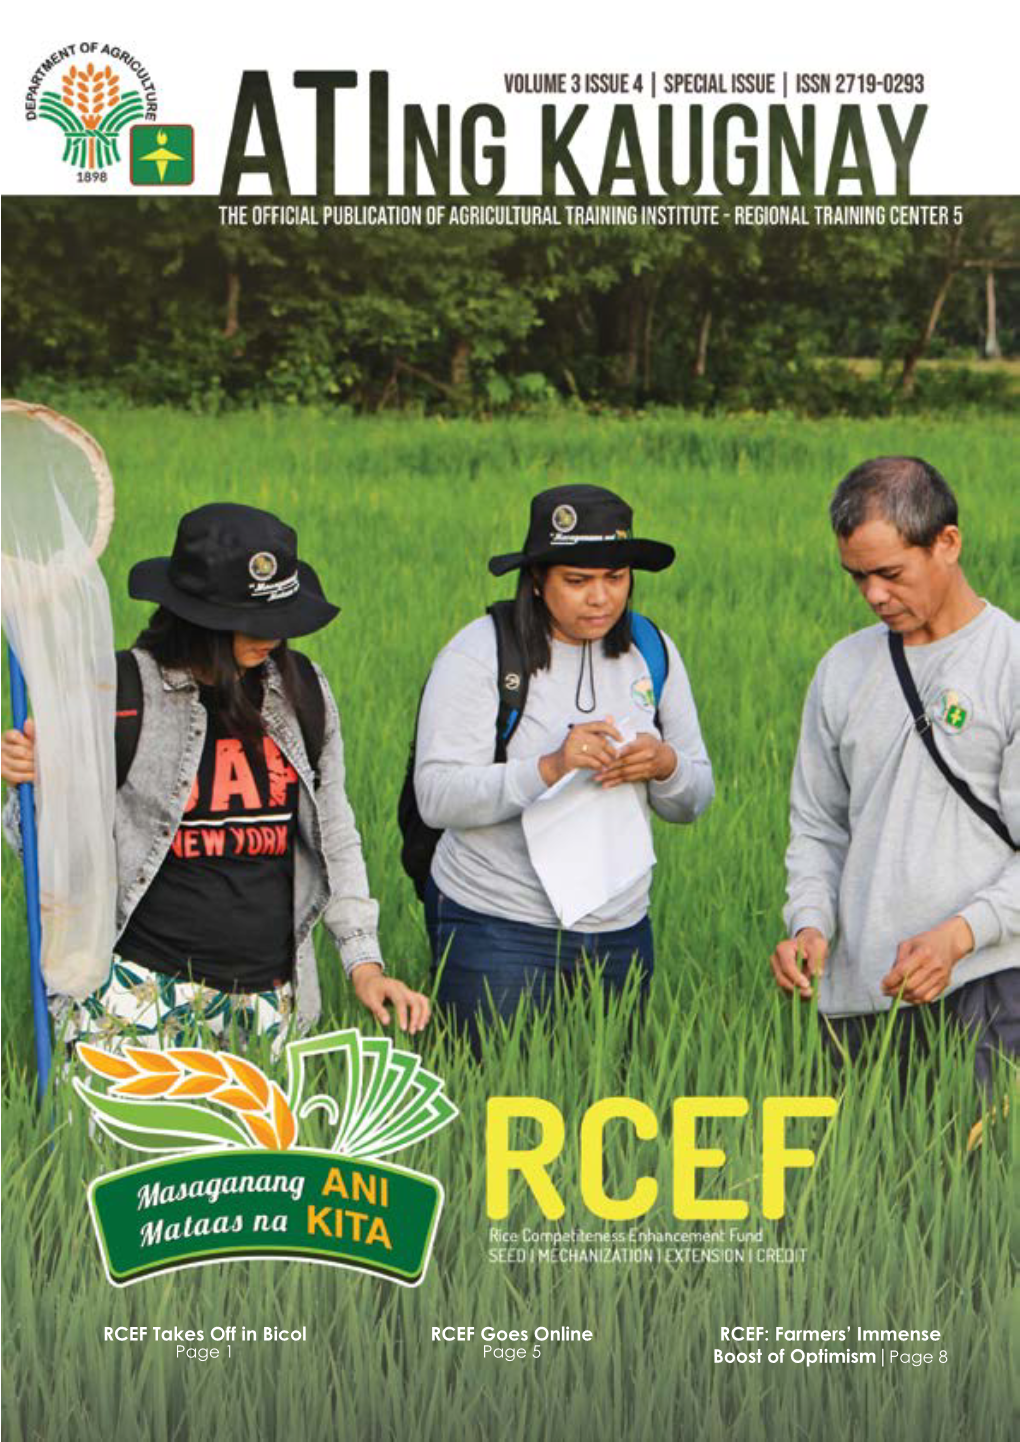 RCEF Takes Off in Bicol RCEF Goes Online RCEF: Farmers’ Immense Page 1 Page 5 Boost of Optimism|Page 8 I N S I D E